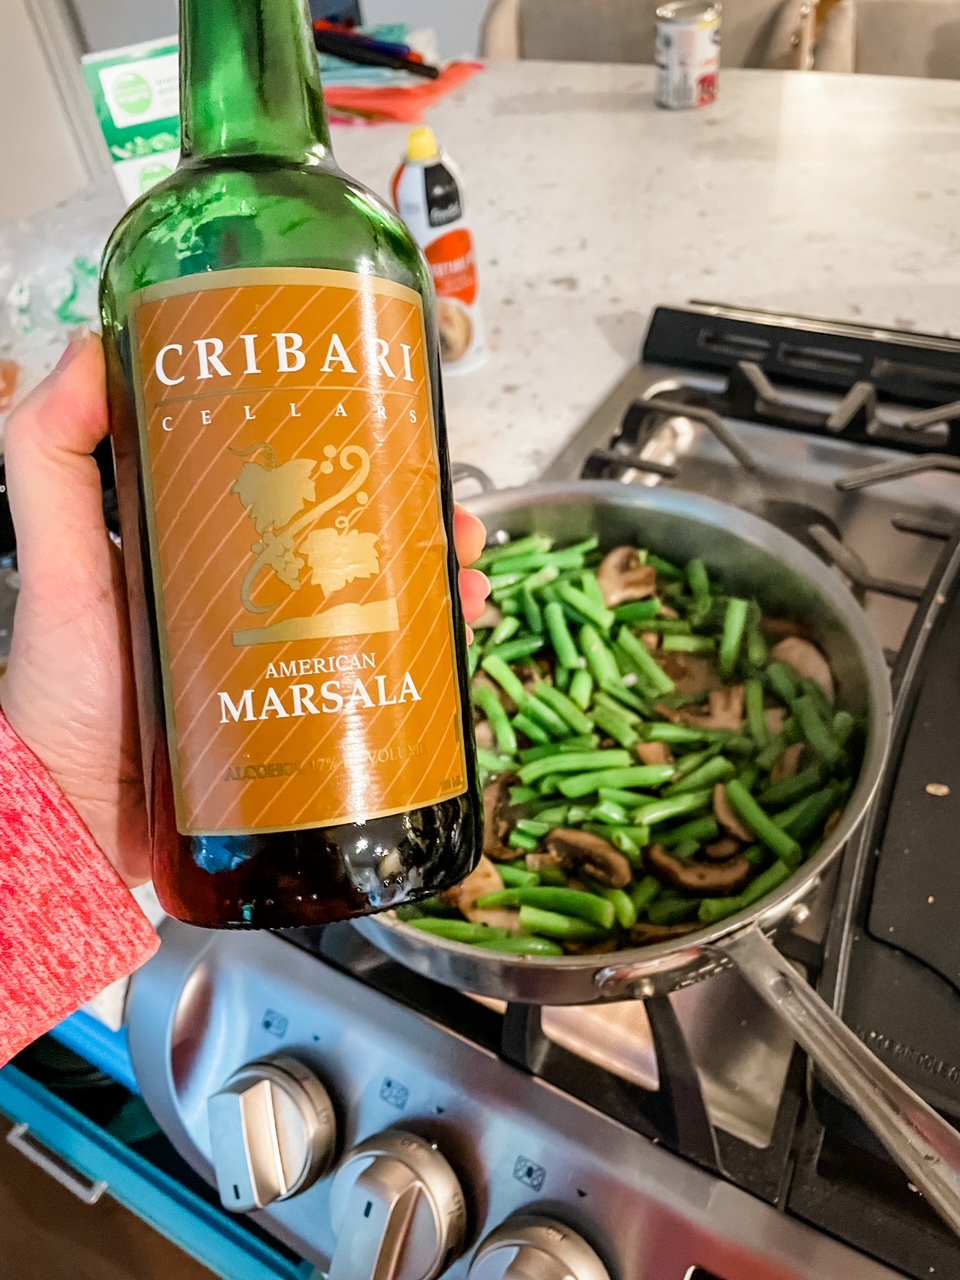 Marie holding a bottle of marsala overr a pan cooking greenbeans and mushrooms